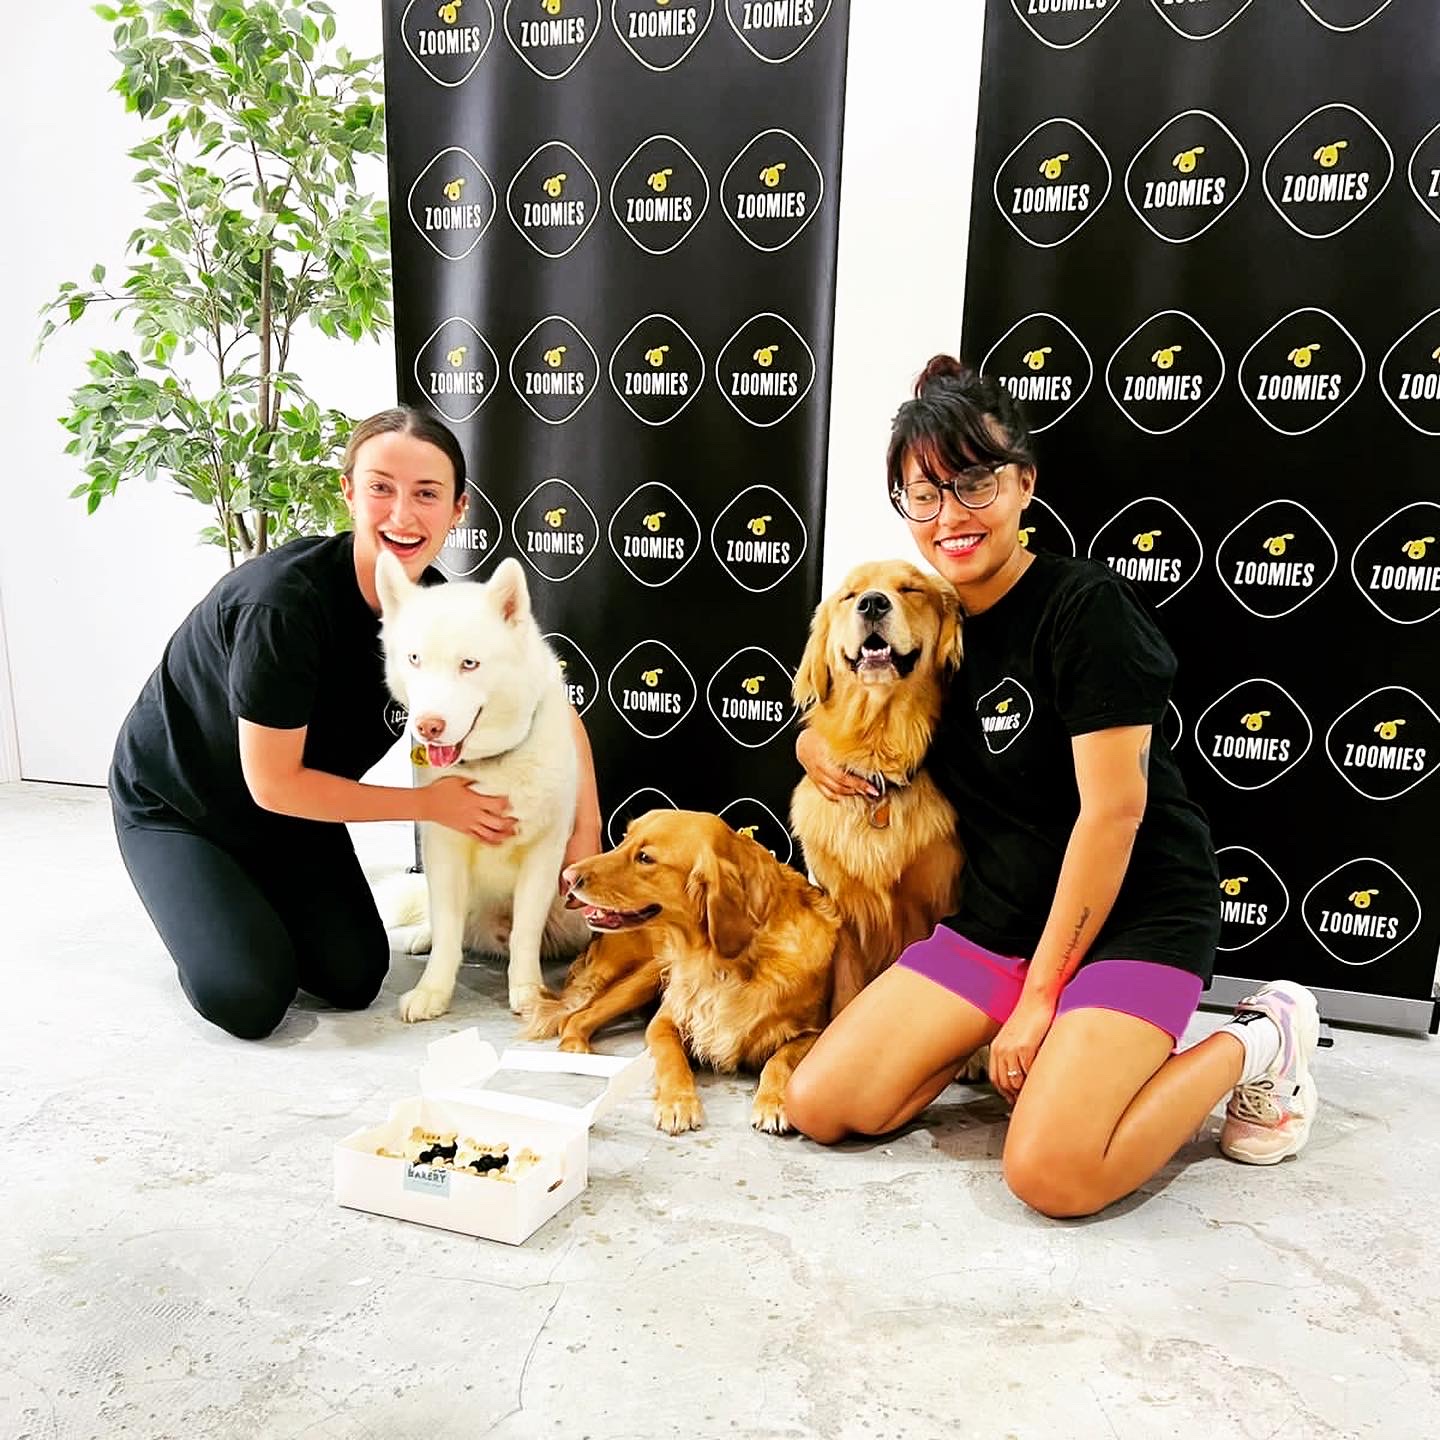 Your Pets' Home Away from Home in Dubai